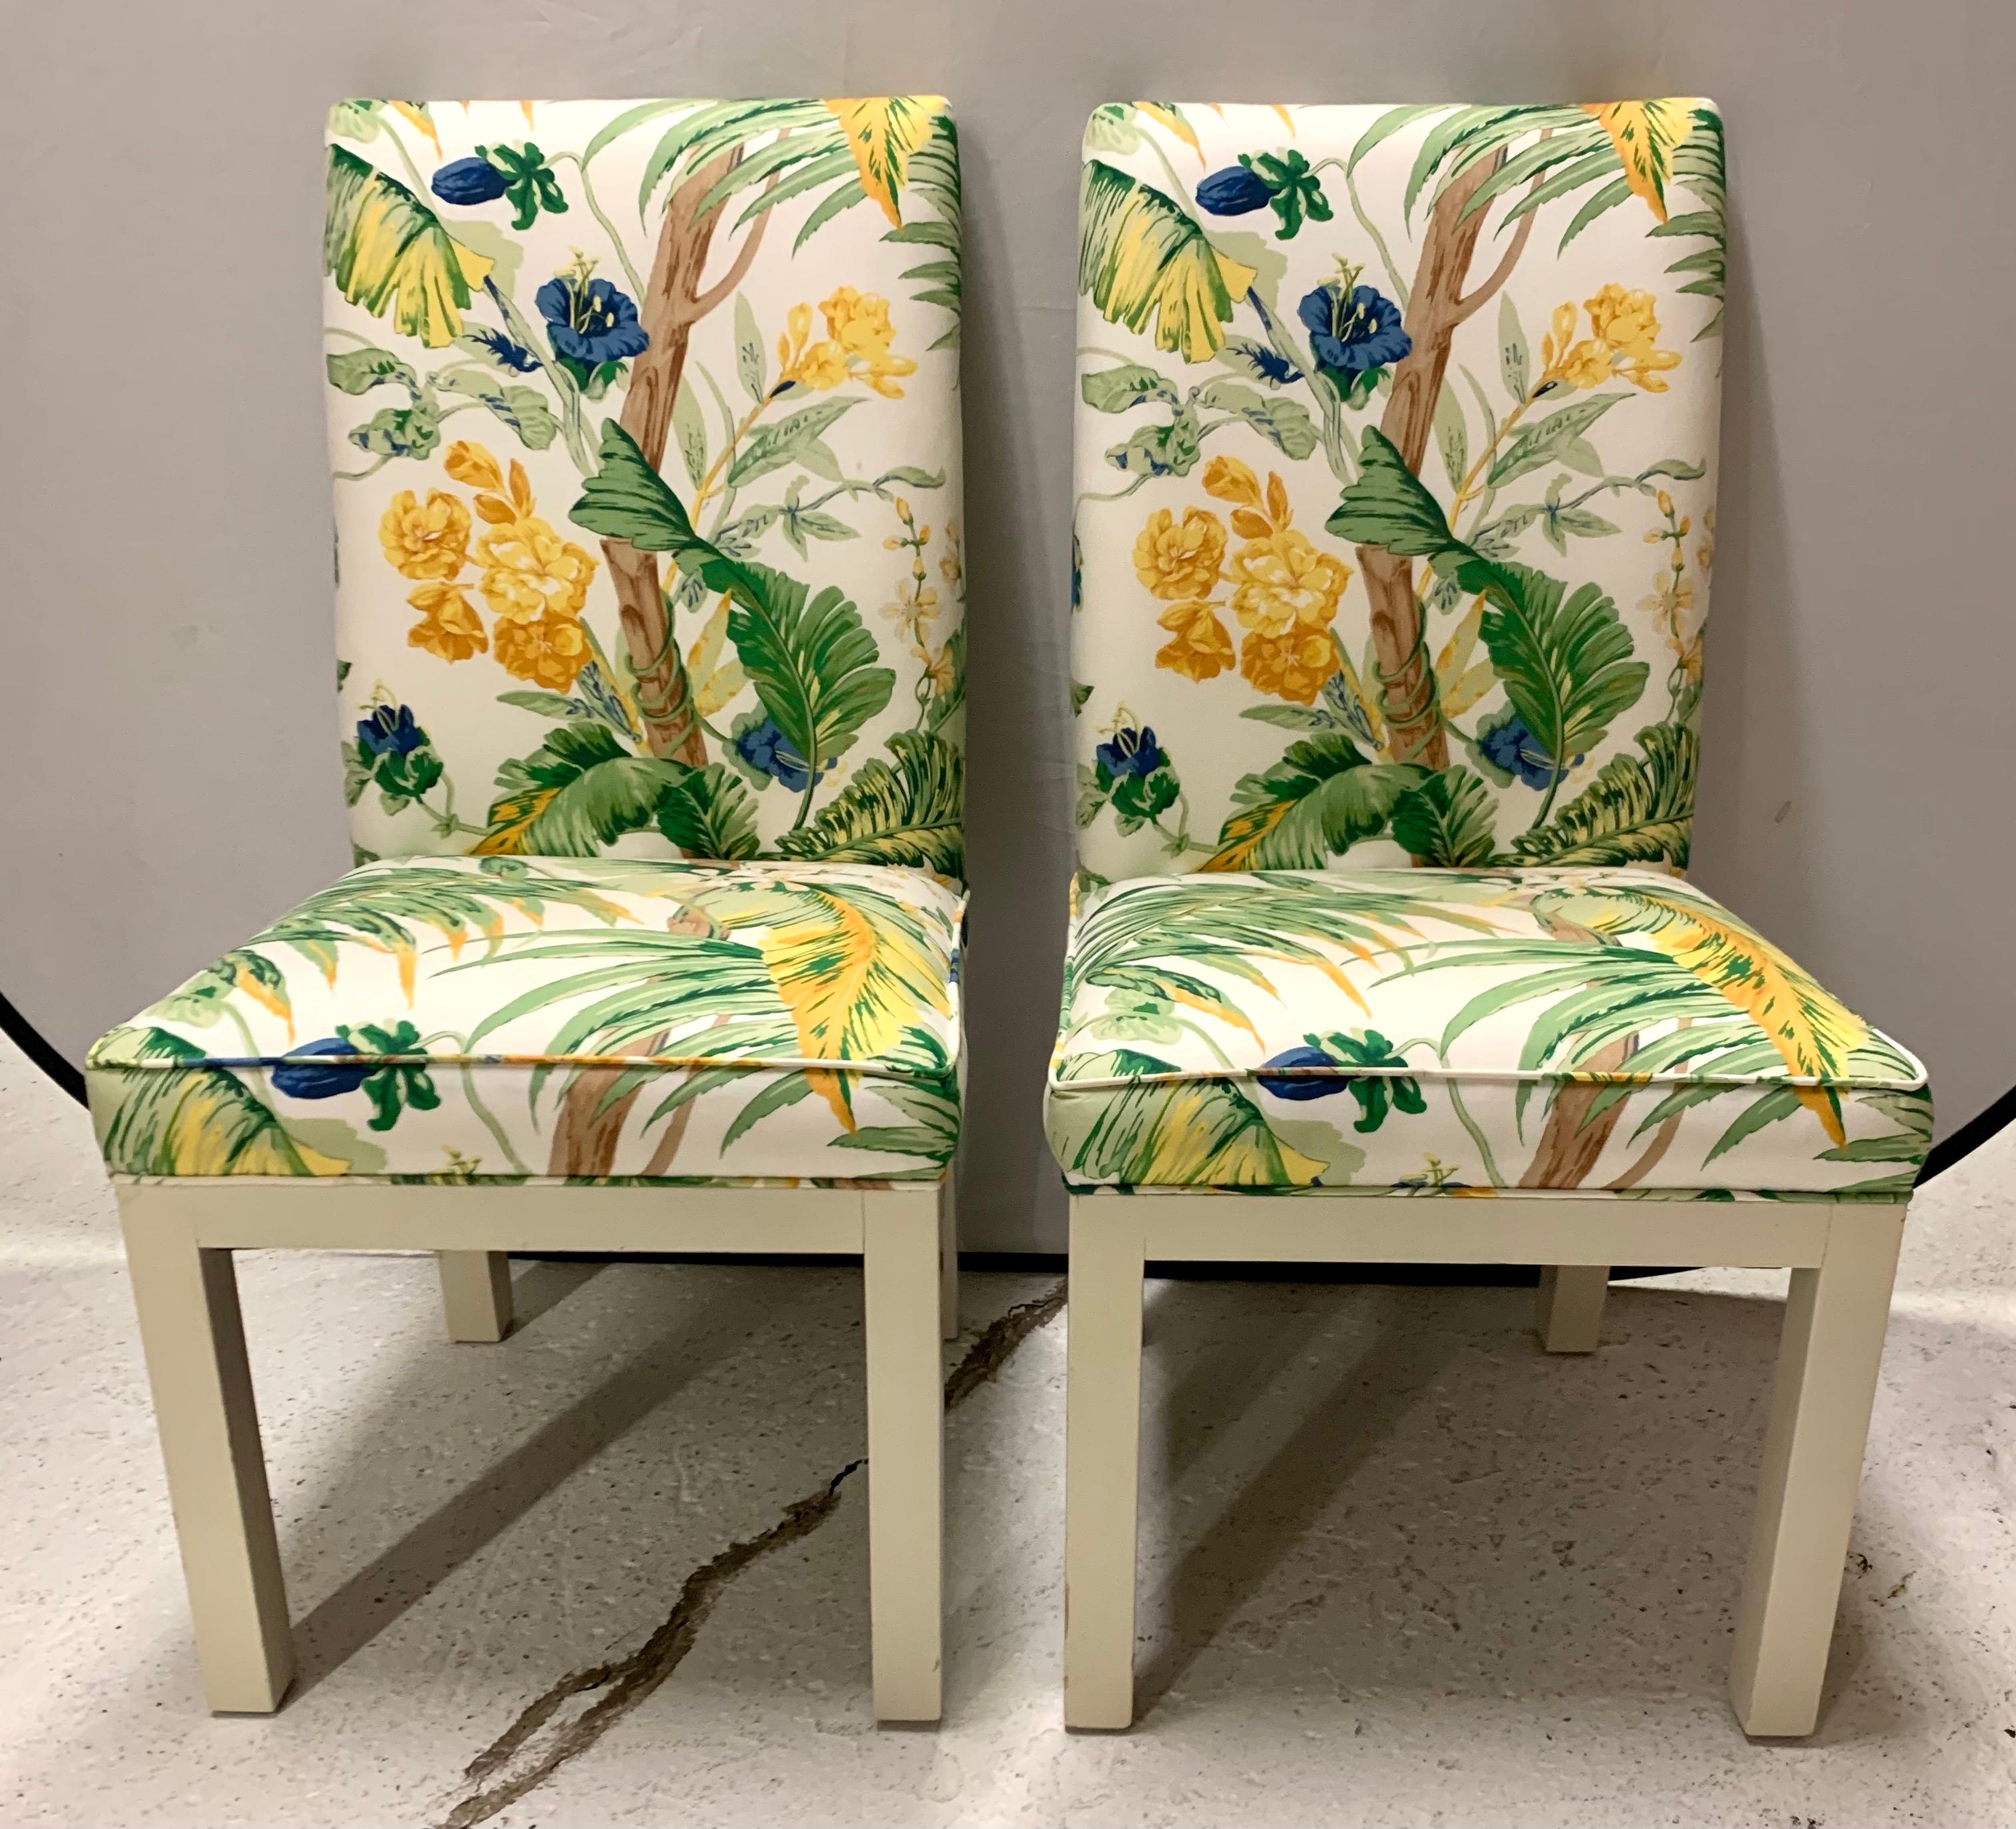 Fabulous set of eight 1970's slipper chairs redone in a vibrant and gorgeous Lilly Pulitzer Lee Jofa fabric. The chairs scream 